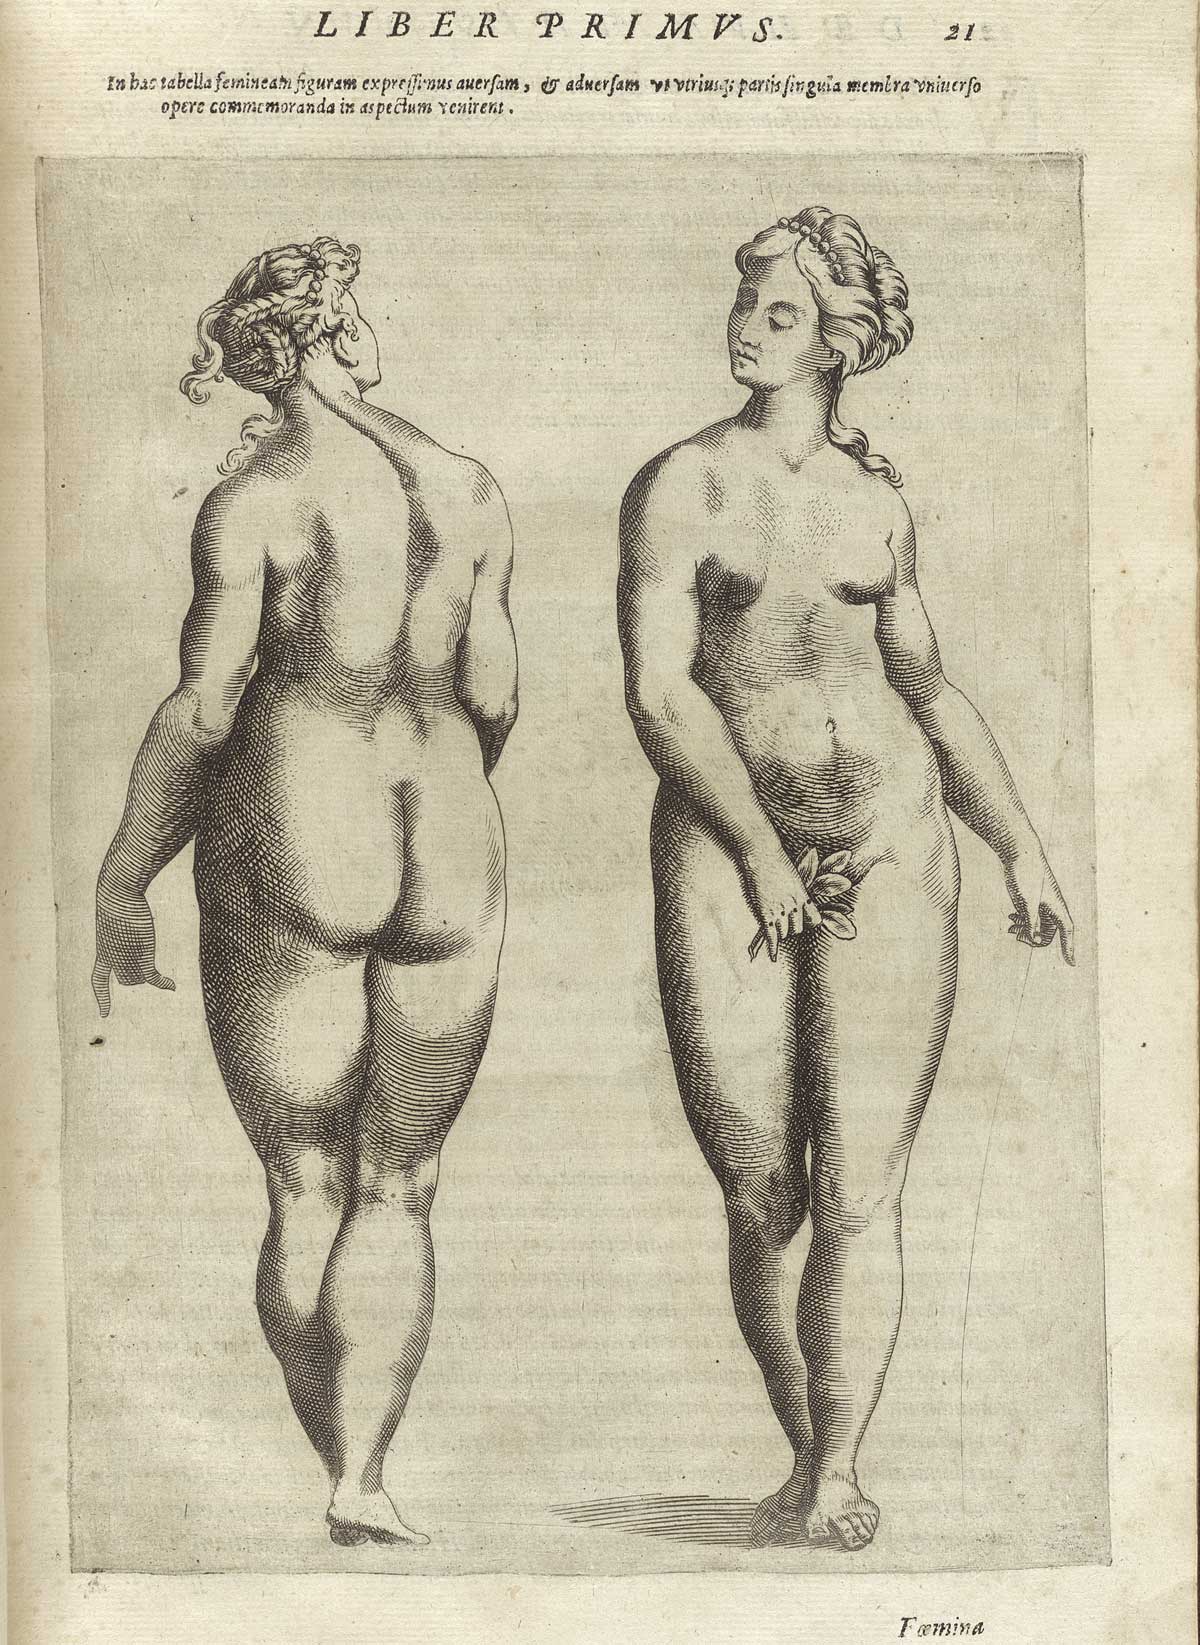 Page 21 of Giambattista della Porta's De humana physiognomonia libri IIII, featuring on the left side of the page the full length posterior view of a nude woman and on the right side of the page the full length frontal view of a nude woman.